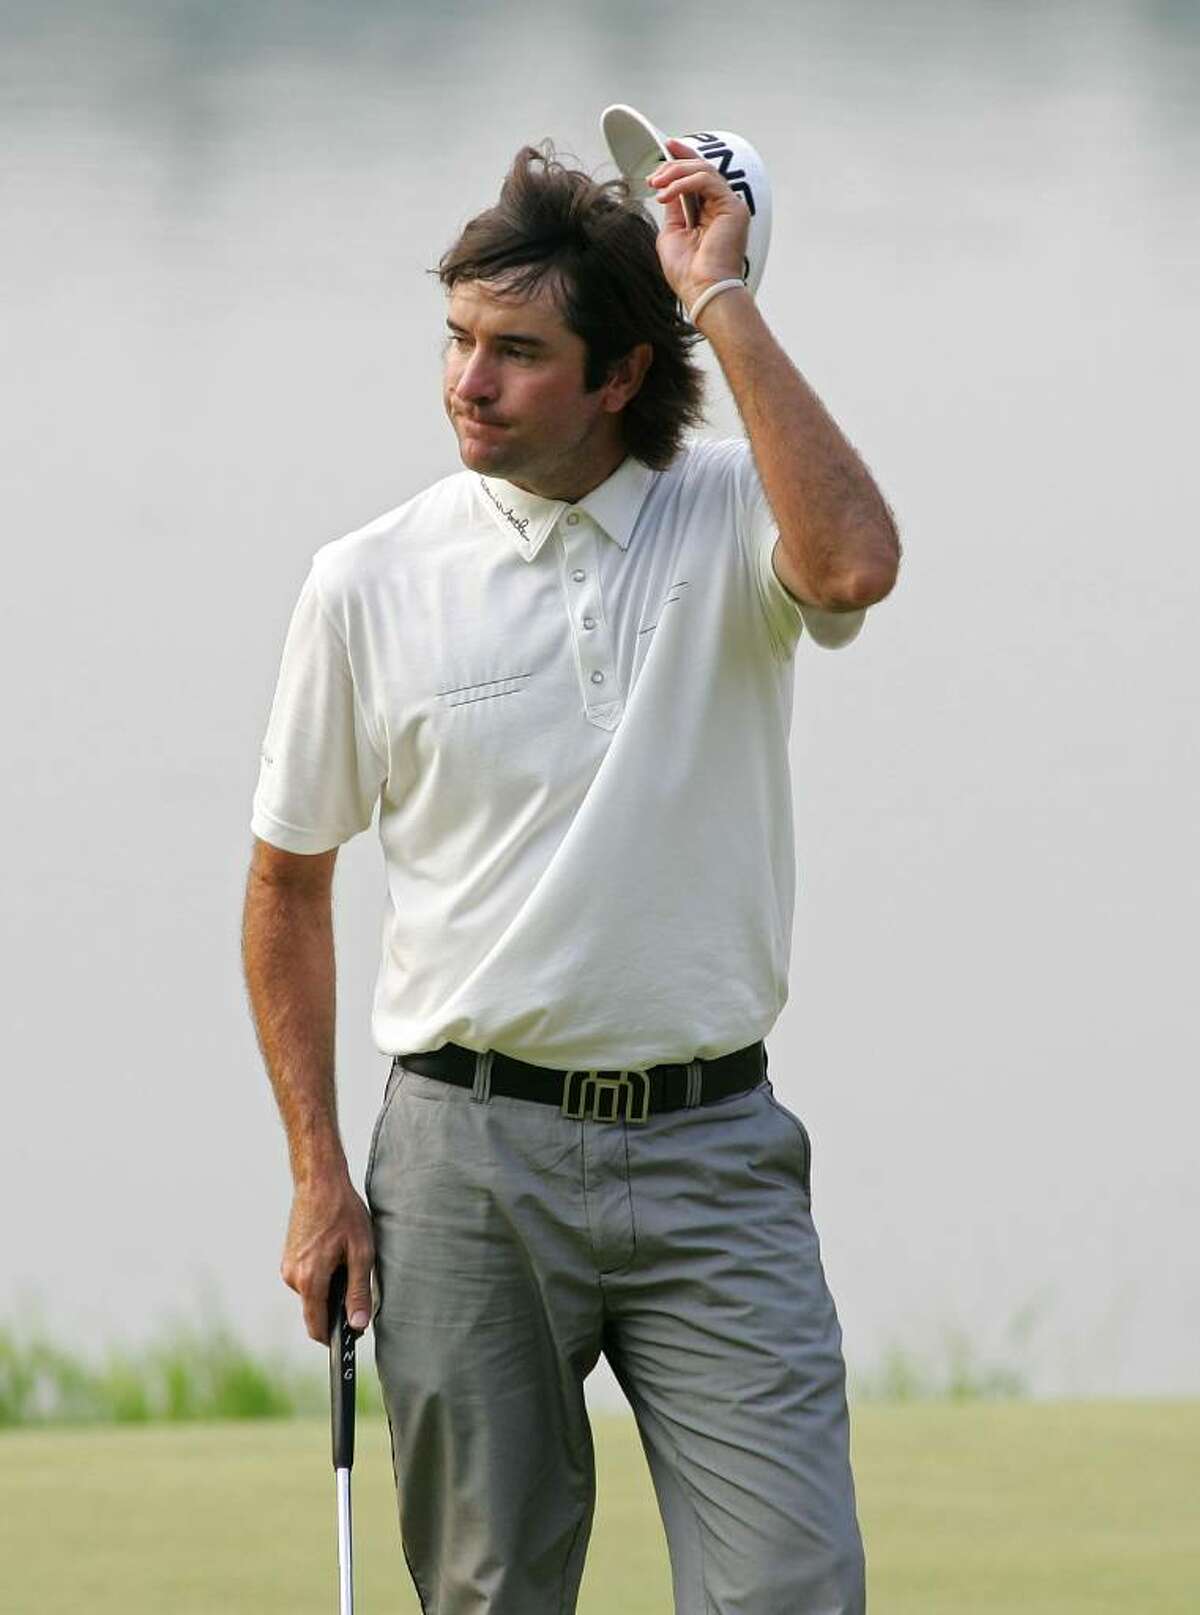 CROMWELL, CT - JUNE 27: Bubba Watson celebrates after winning a two-hole playoff on the 16th green after the final round of the Travelers Championship held at TPC River Highlands on June 27, 2010 in Cromwell, Connecticut. (Photo by Michael Cohen/Getty Images) *** Local Caption *** Bubba Watson